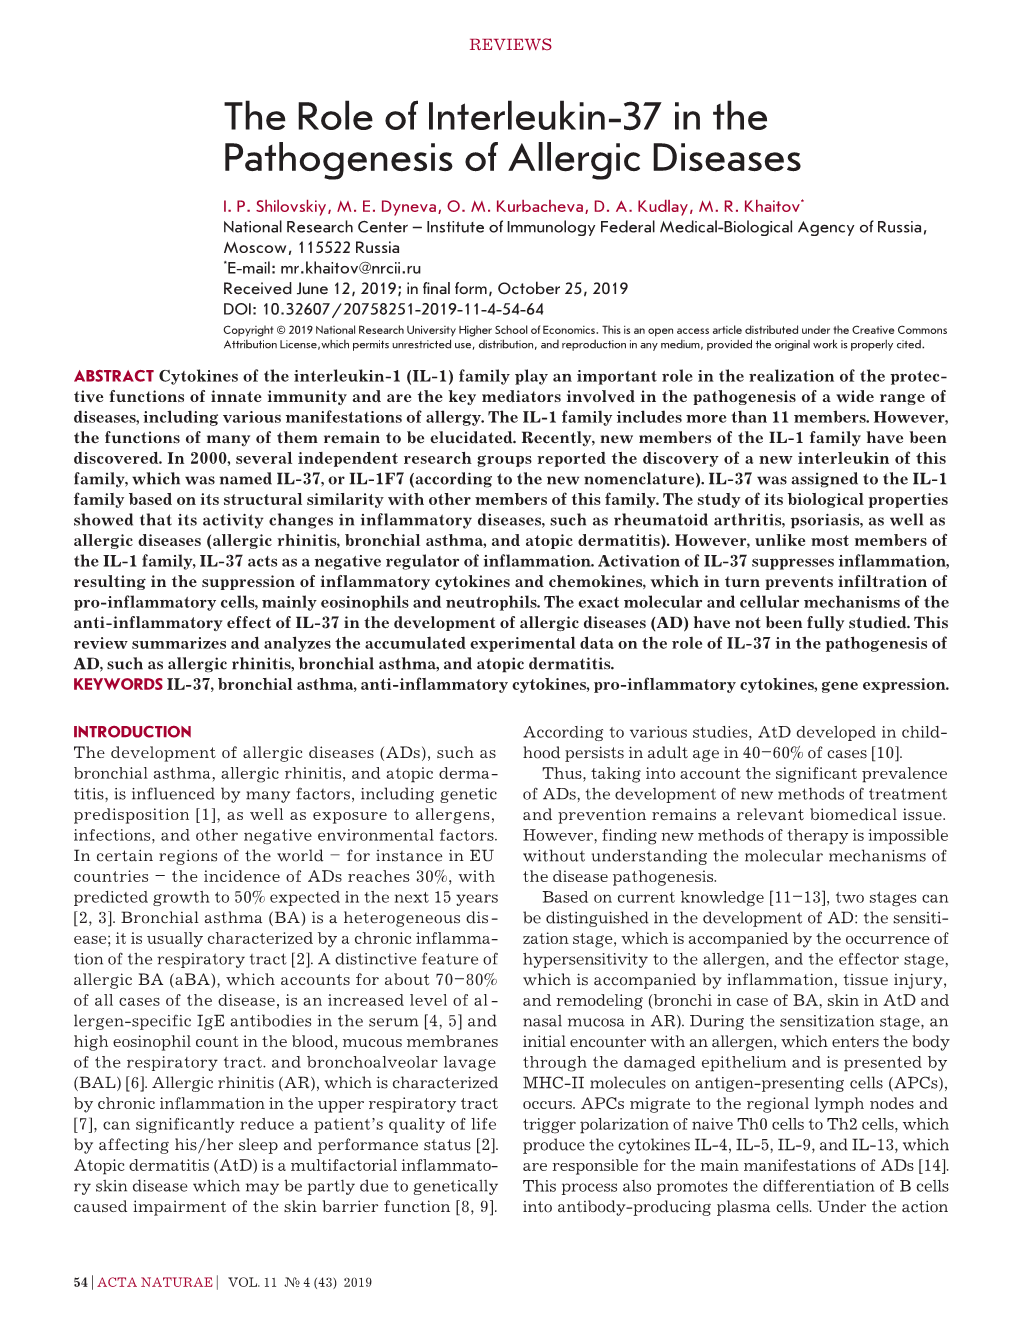 The Role of Interleukin-37 in the Pathogenesis of Allergic Diseases